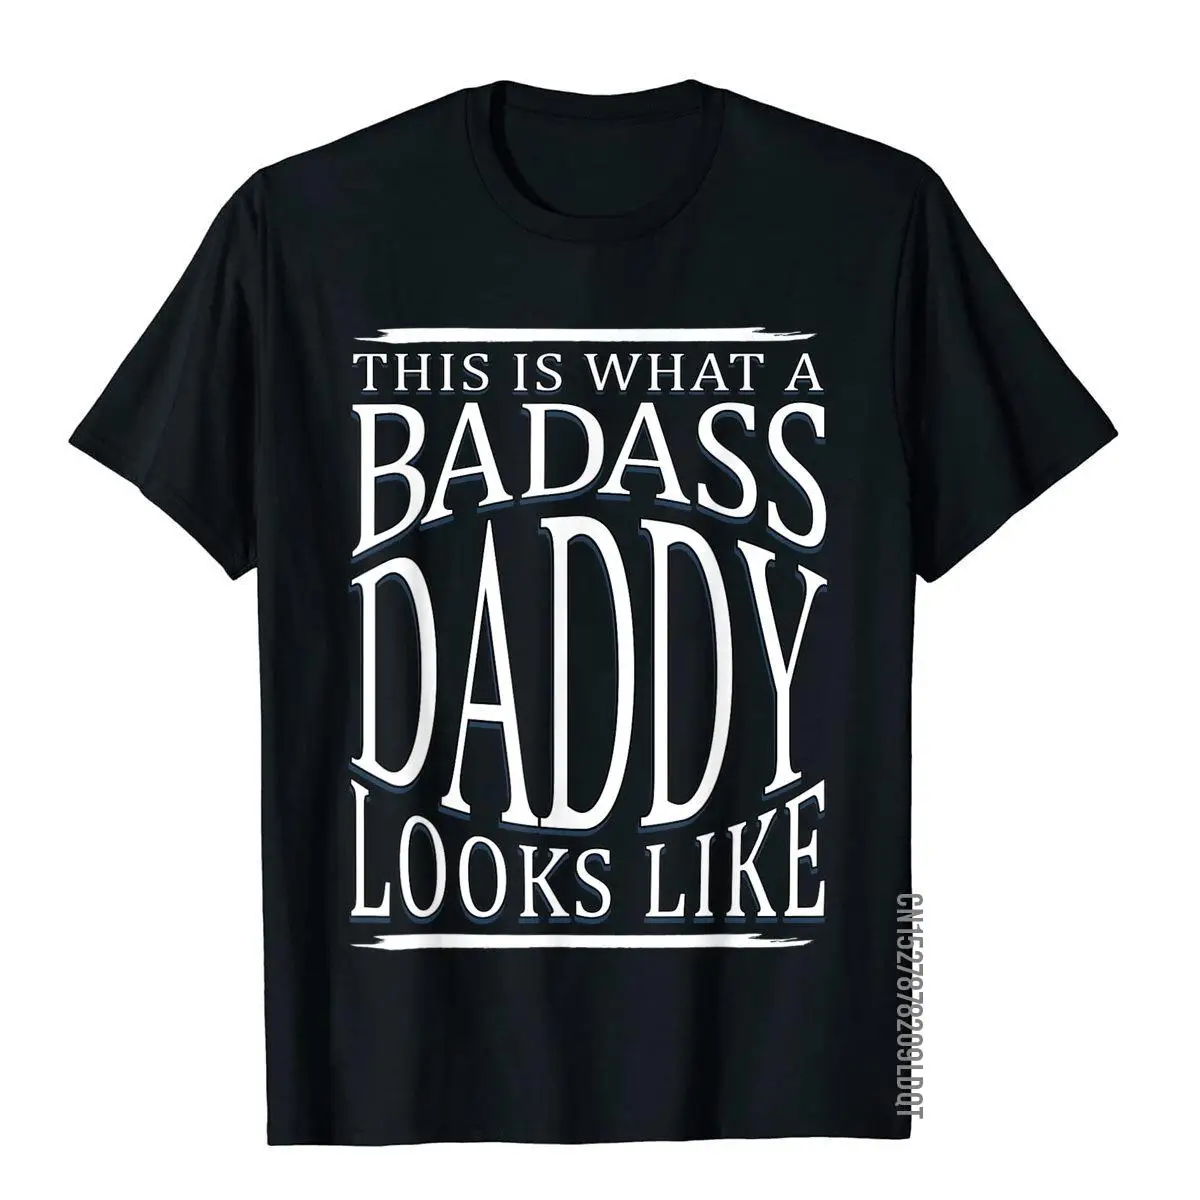 

Gifts For Dad - This Is What A Badass Daddy Looks Like APA Street Top T-Shirts For Men Cotton Tops Tees Custom Hot Sale